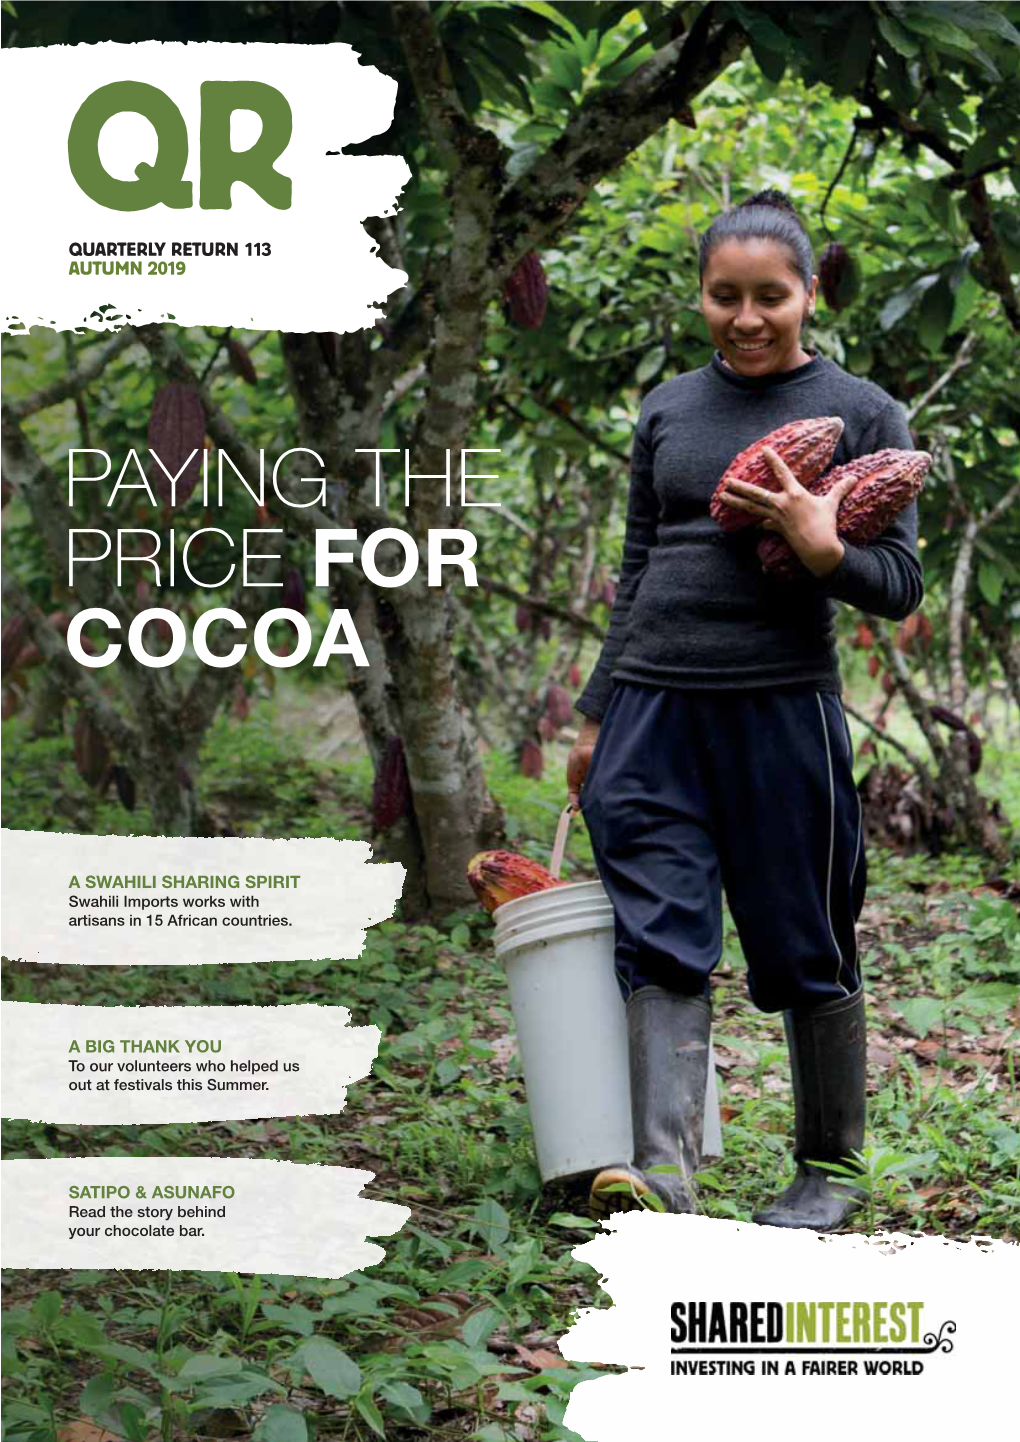 Paying the Price for Cocoa